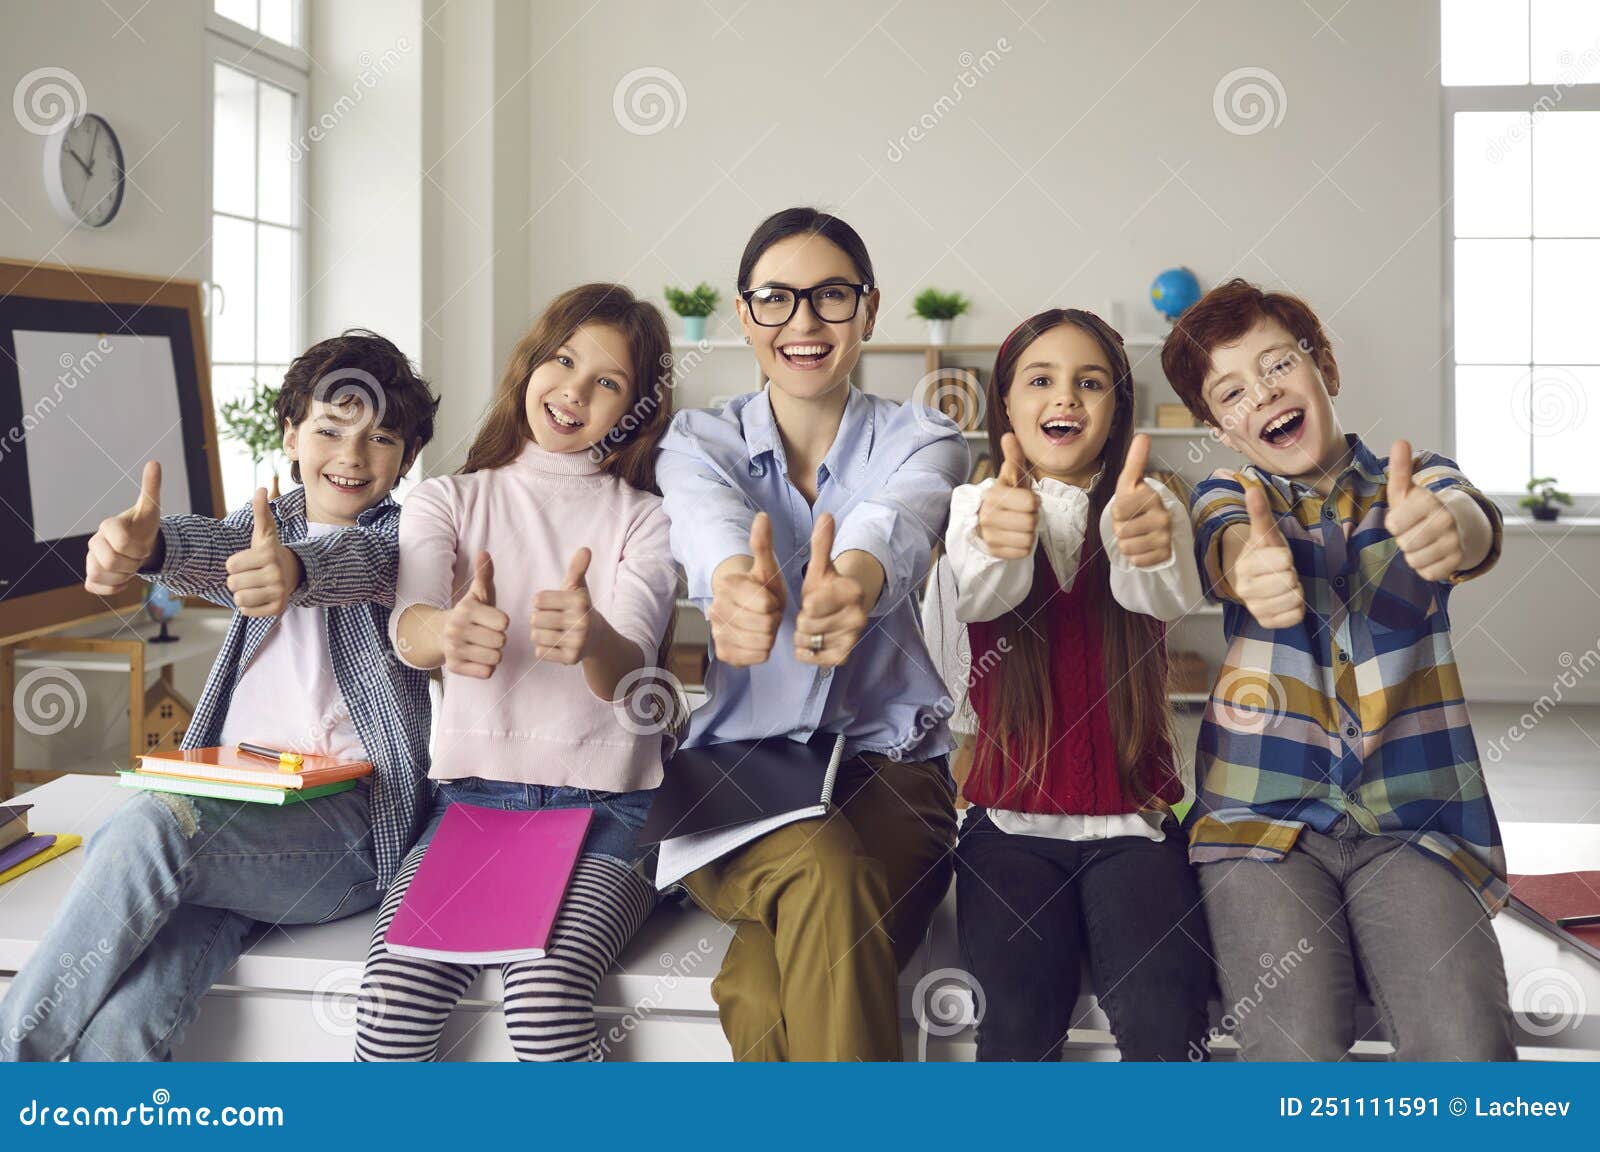 happy smiling teacher with pupils group giving thumbs up portrait in schoolroom